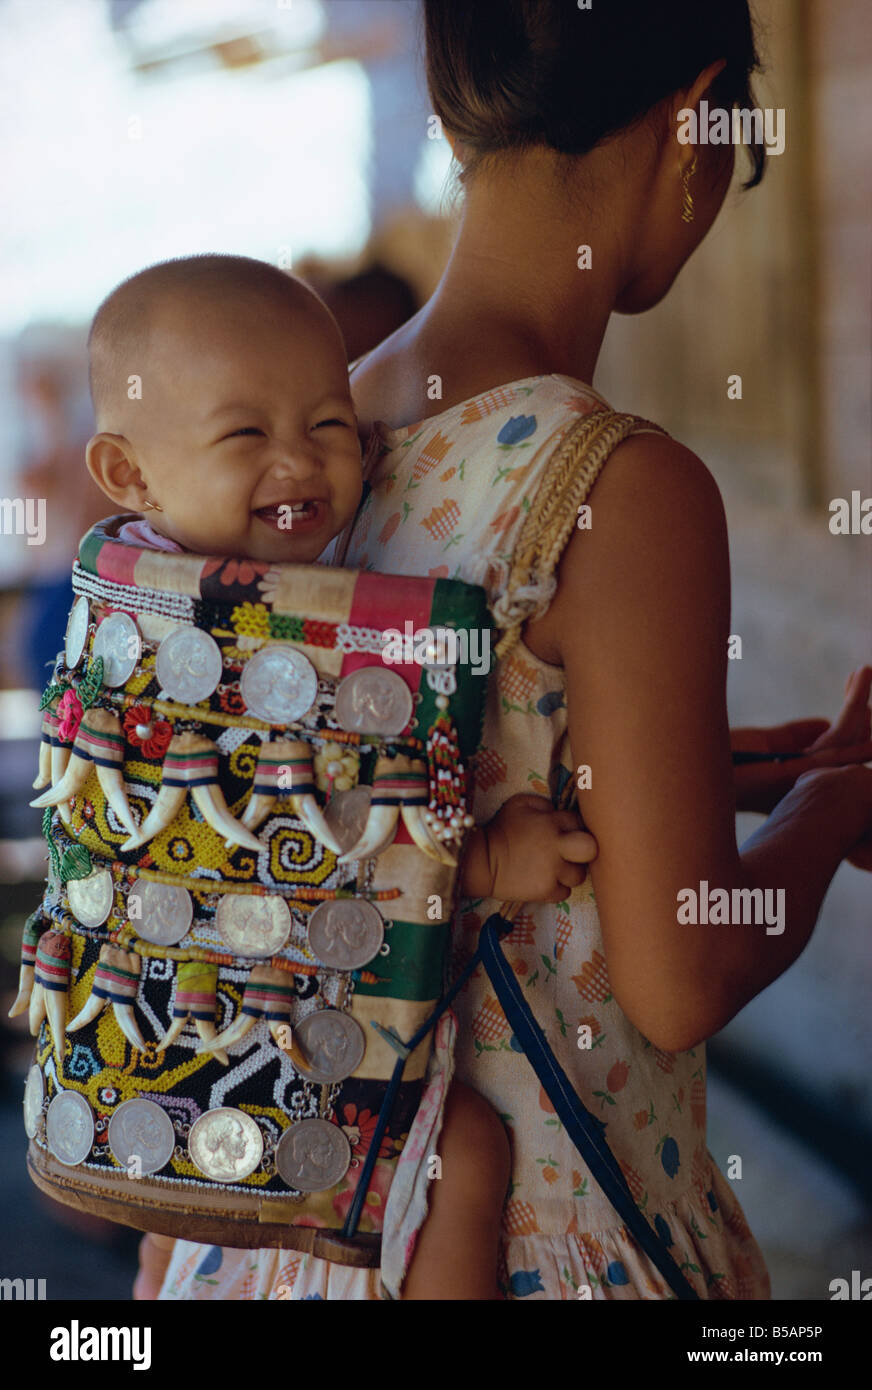 Kenyah woman with baby in a traditional carrier Kalimantan Borneo Indonesia  Asia C Leimbach Stock Photo - Alamy